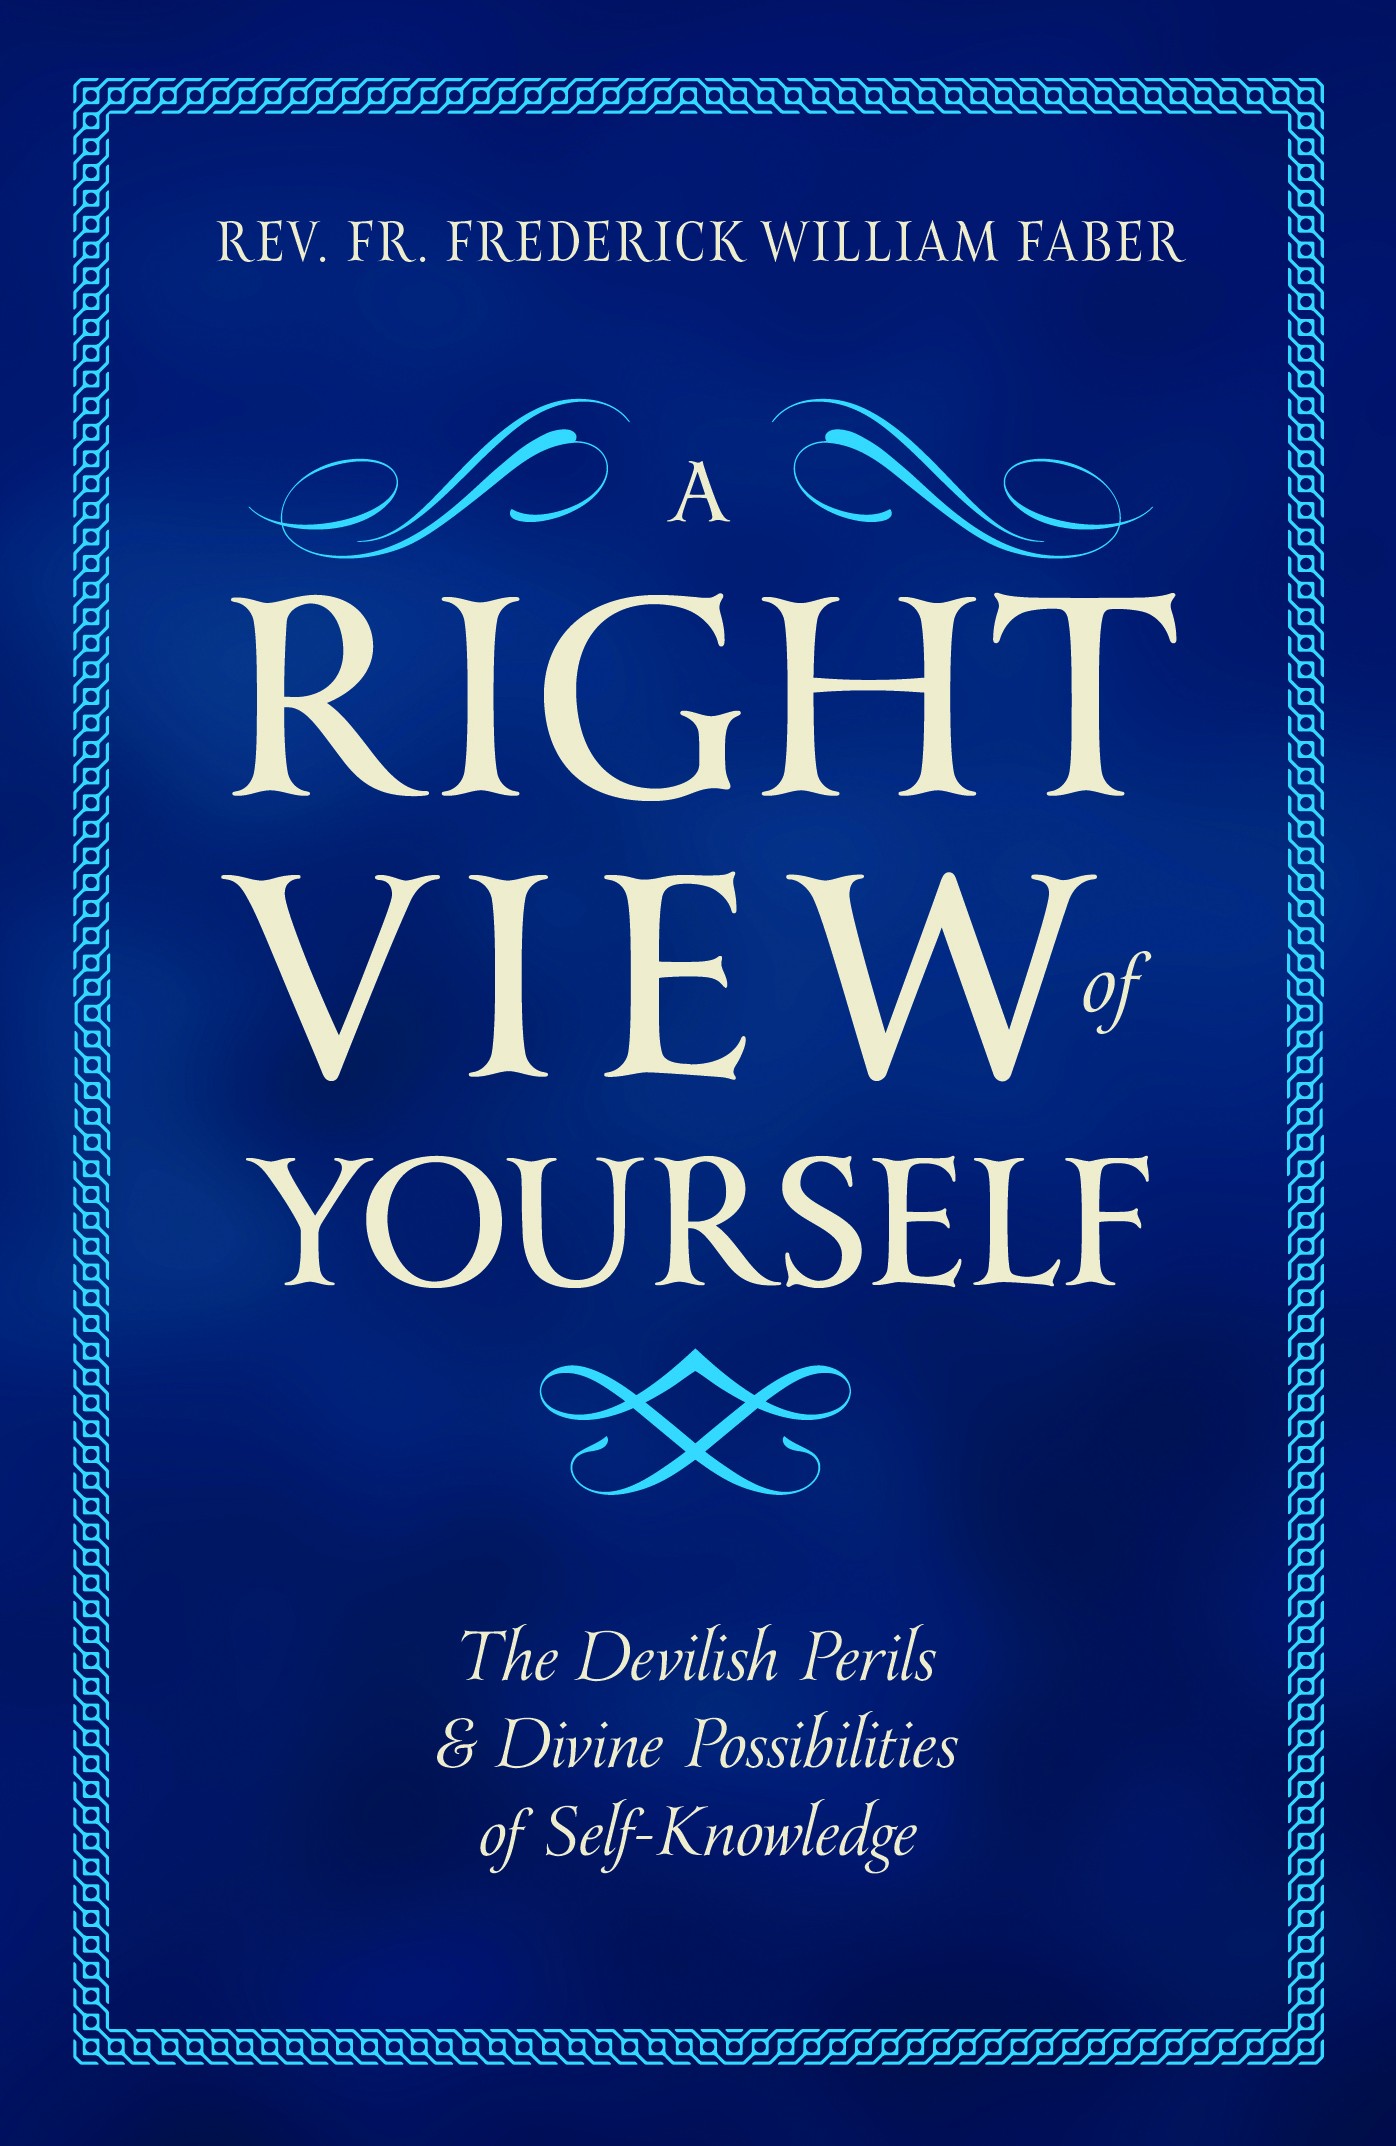 A Right View of Yourself / Rev Fr Frederick William Faber